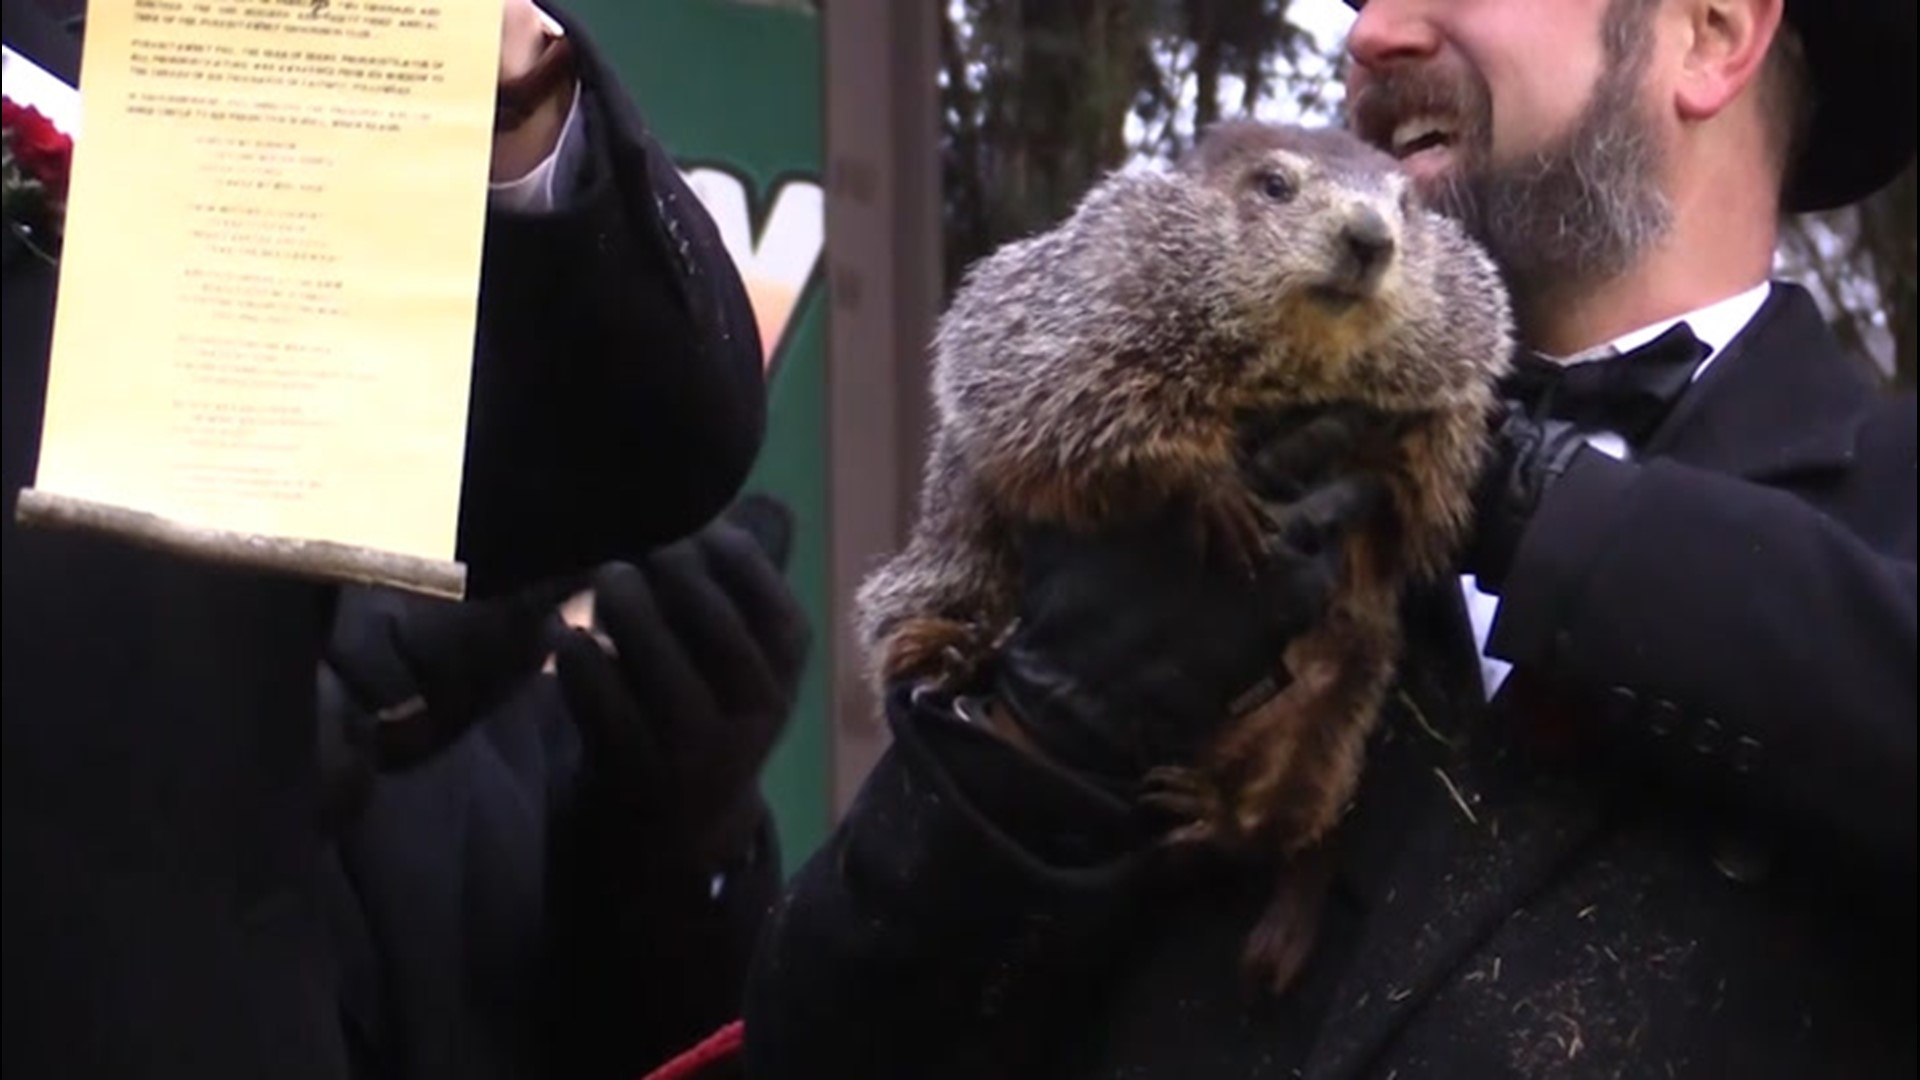 The history of Groundhog Day 